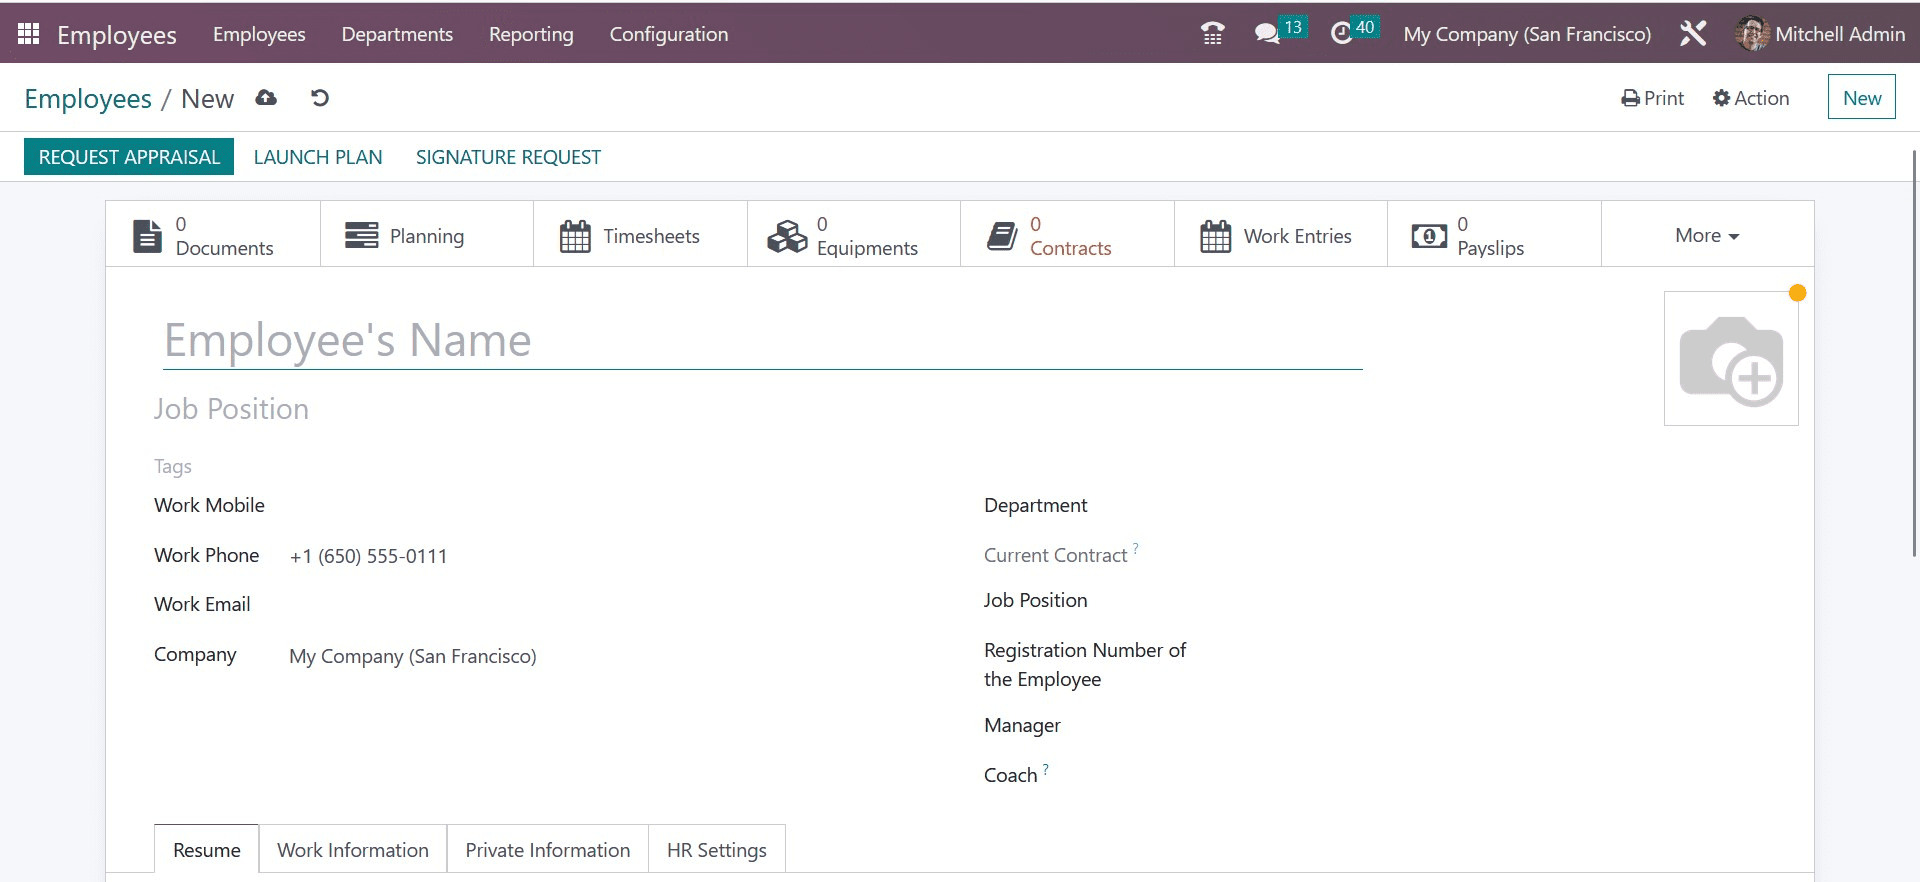 bhow-to-configure-employees-in-odoo-16-employee-management-6-cybrosys